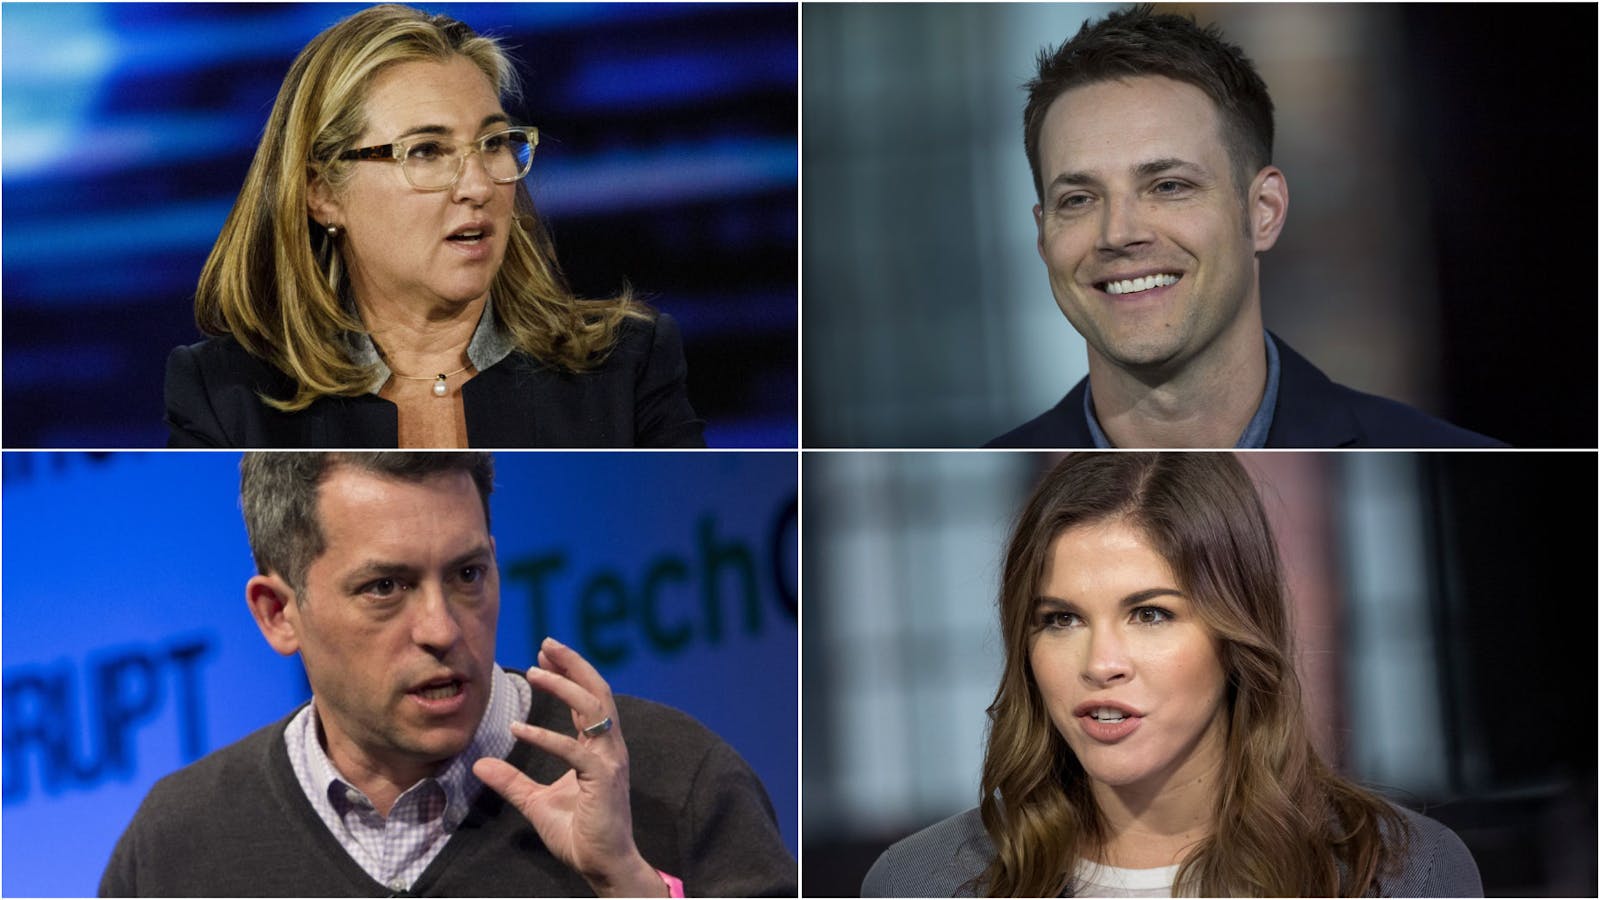 Clockwise from top left: Vice CEO Nancy Dubuc; Offerup CEO Nick Huzar; Glossier CEO Emily Weiss; Vox Media CEO Jim Bankoff. Photos by Bloomberg